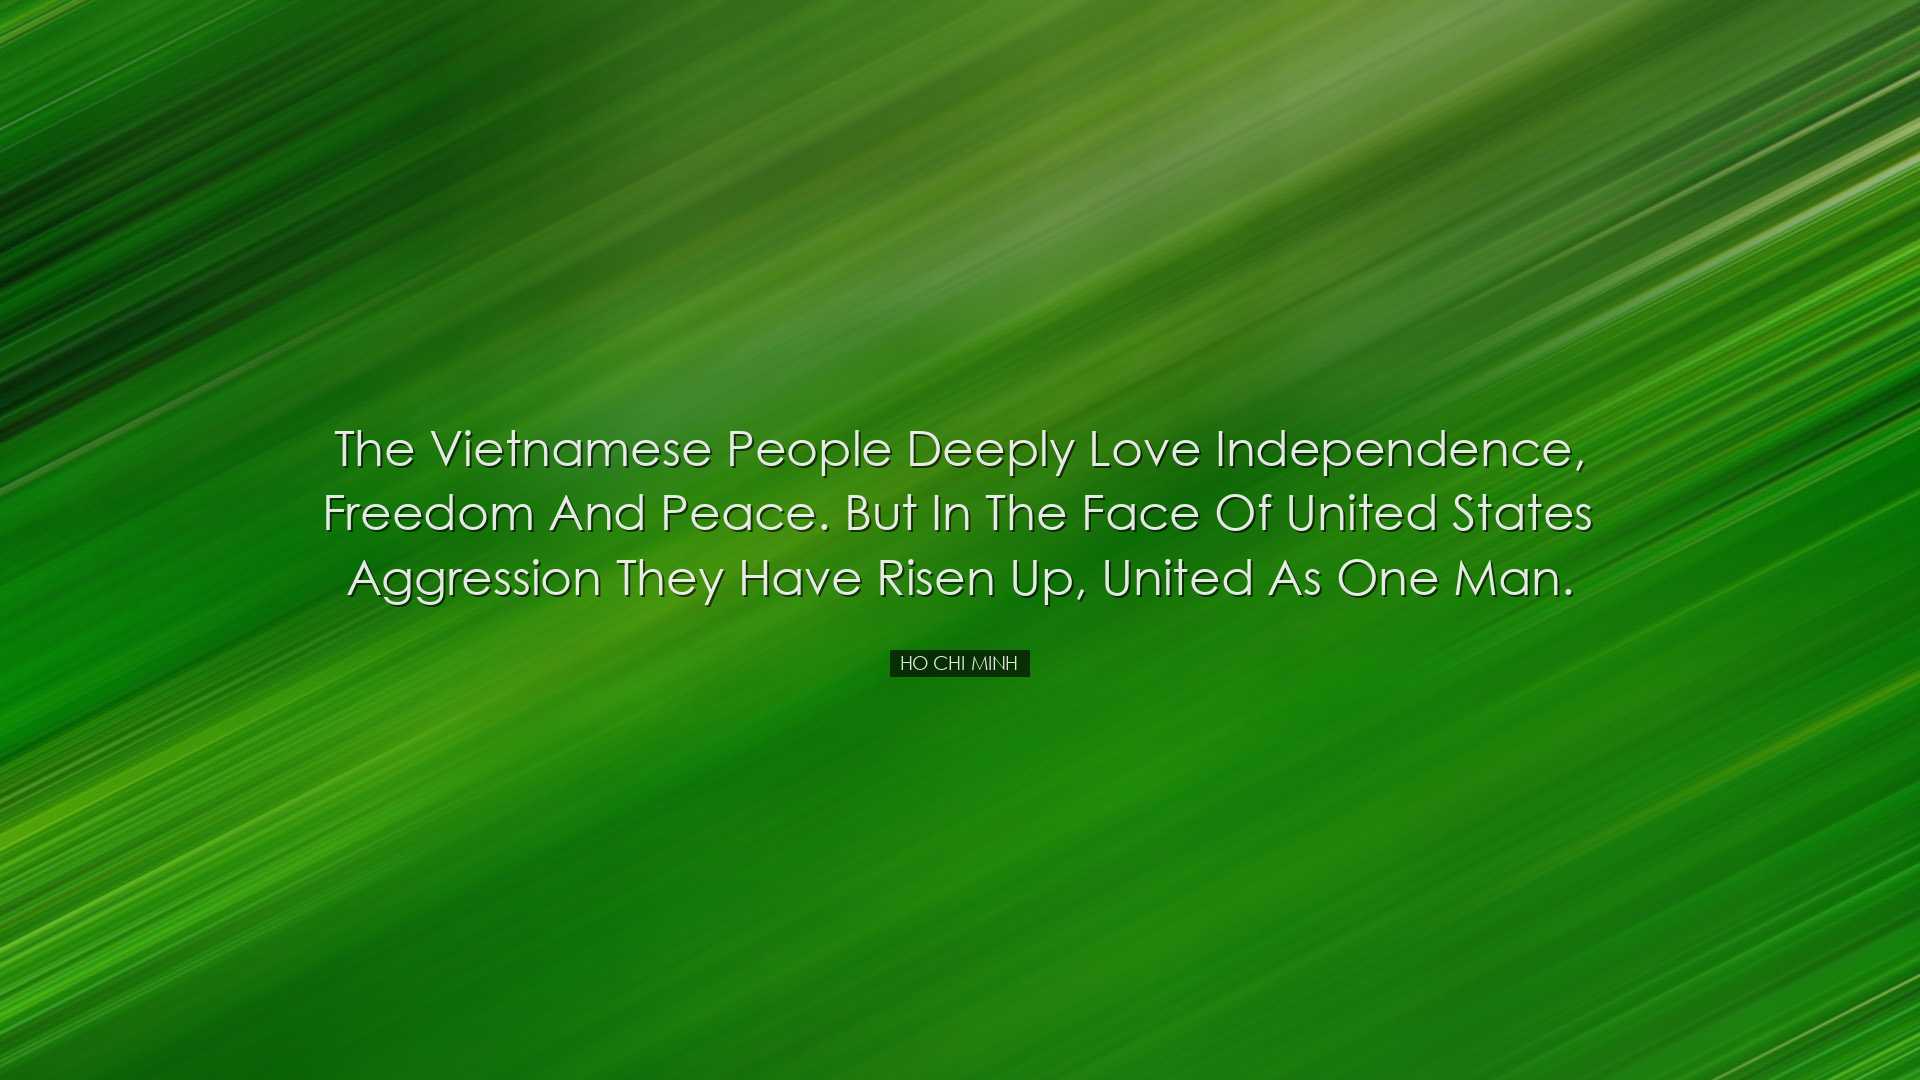 The Vietnamese people deeply love independence, freedom and peace.